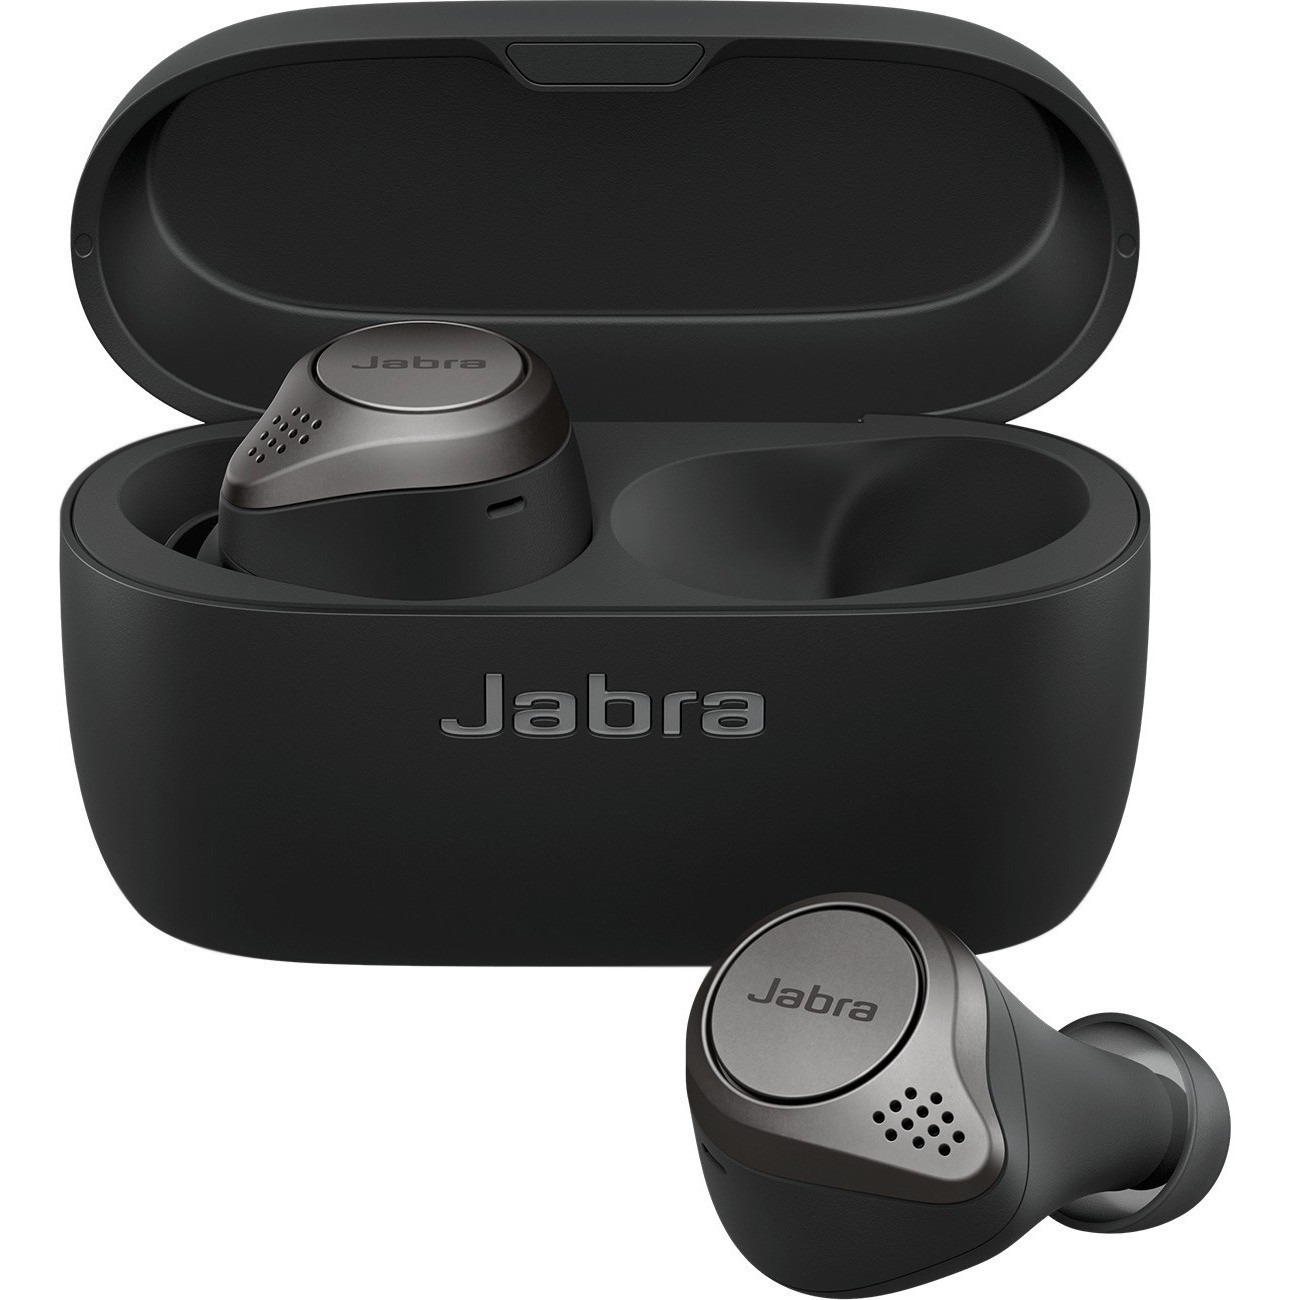 Jabra Elite 75t Voice Assistant Enabled True Wireless earbuds with